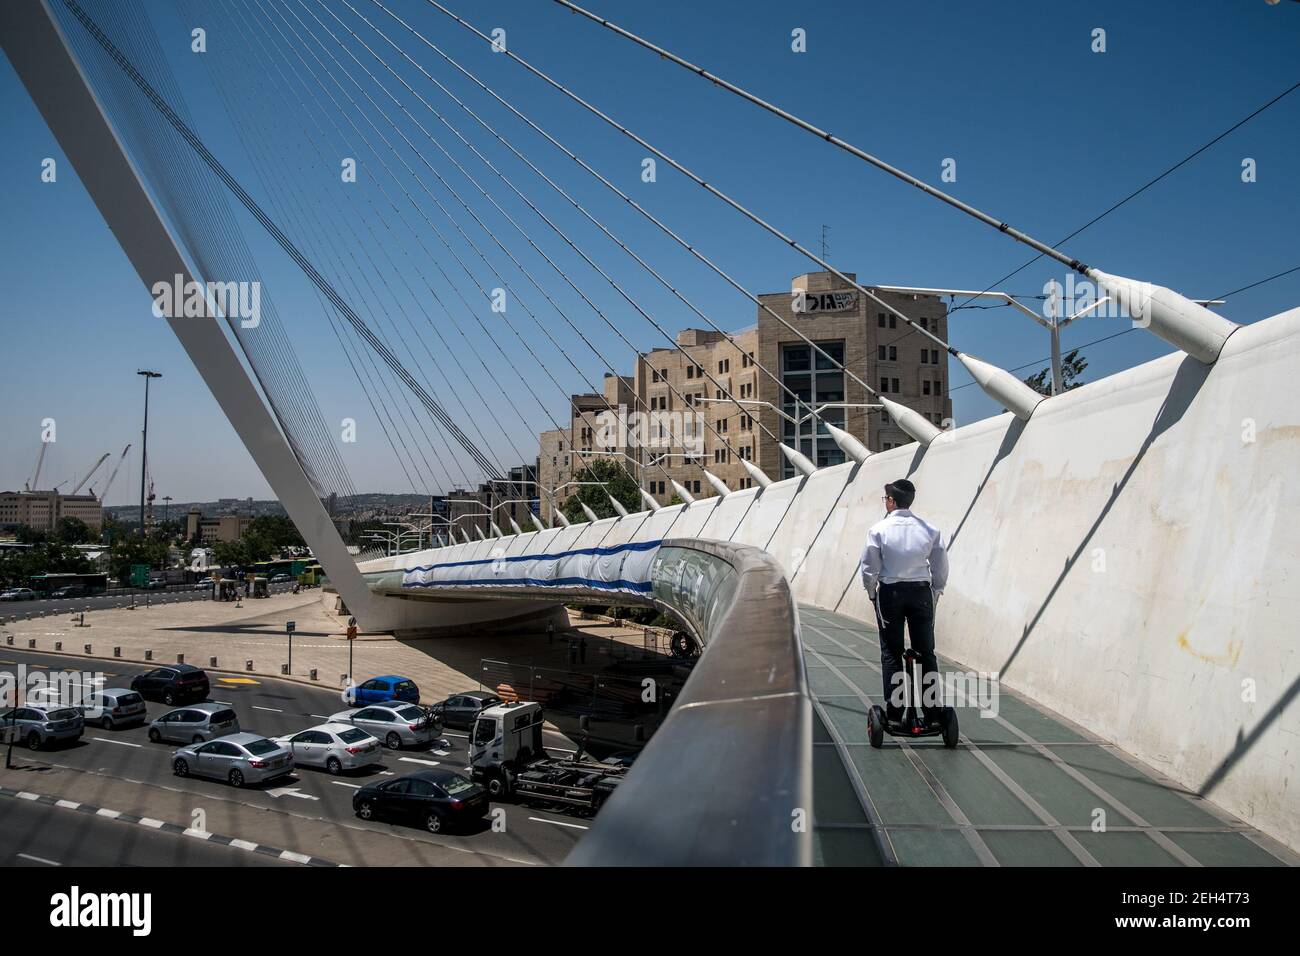 The Cordes Bridge. This one is now part of the jerusalemite landscape. With its steel cables connecting the structure to a sort of mast, the futuristic work of Spanish architect Santiago Calatrava allows the tramway to cross a busy intersection in Jerusalem, on the road leading to Tel Aviv. A footbridge with glass railing adjacent to the tramway has been provided for pedestrians. May 17, 2018. Jerusalem. Israel. Stock Photo